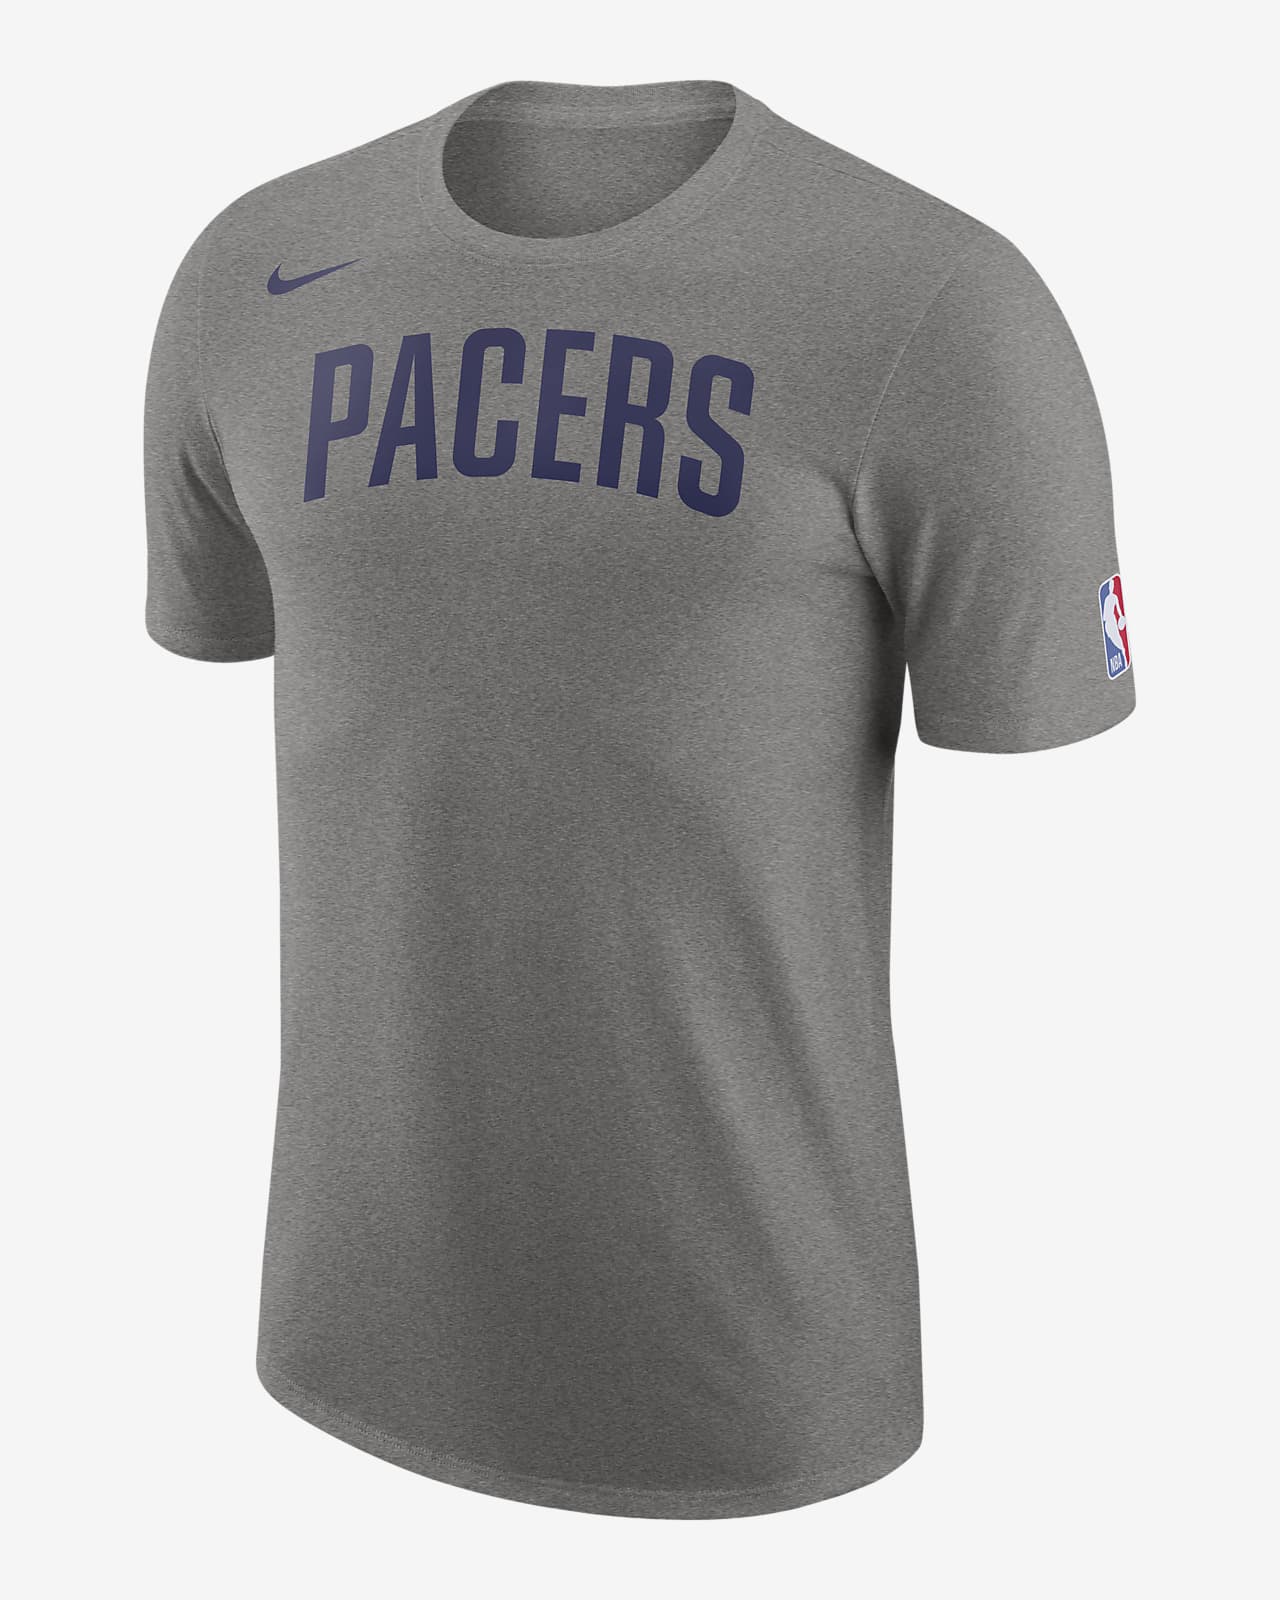 Order your Indiana Pacers Nike City Edition gear today